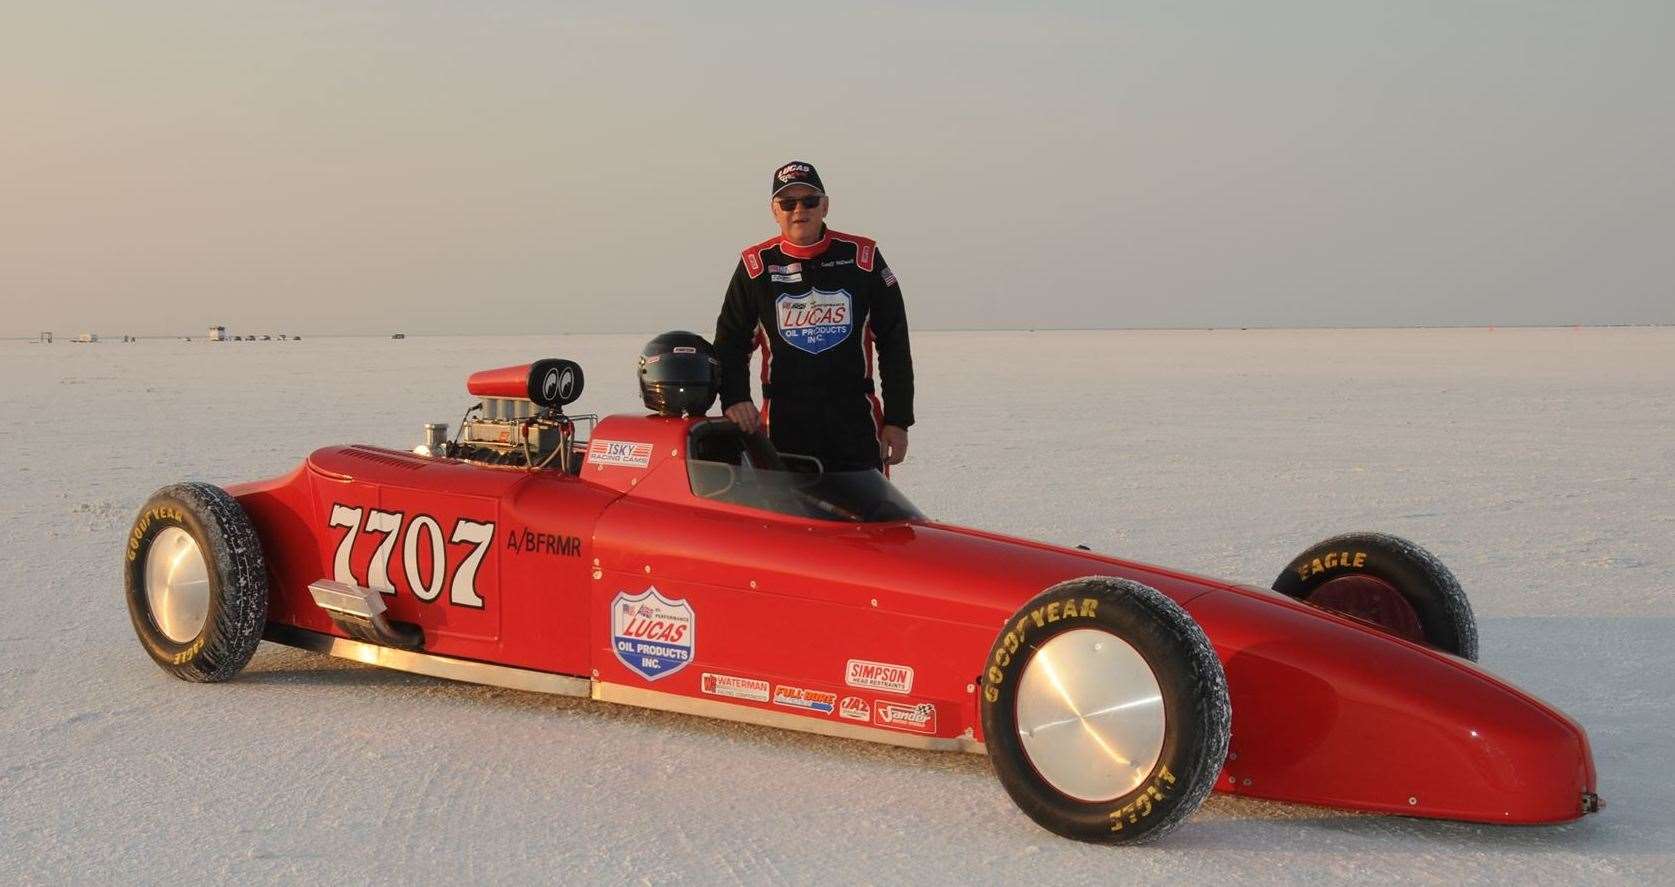 Geoff Stilwell posing with his car at the Bonneville Salt Flats. Picture: Geoff Stilwell